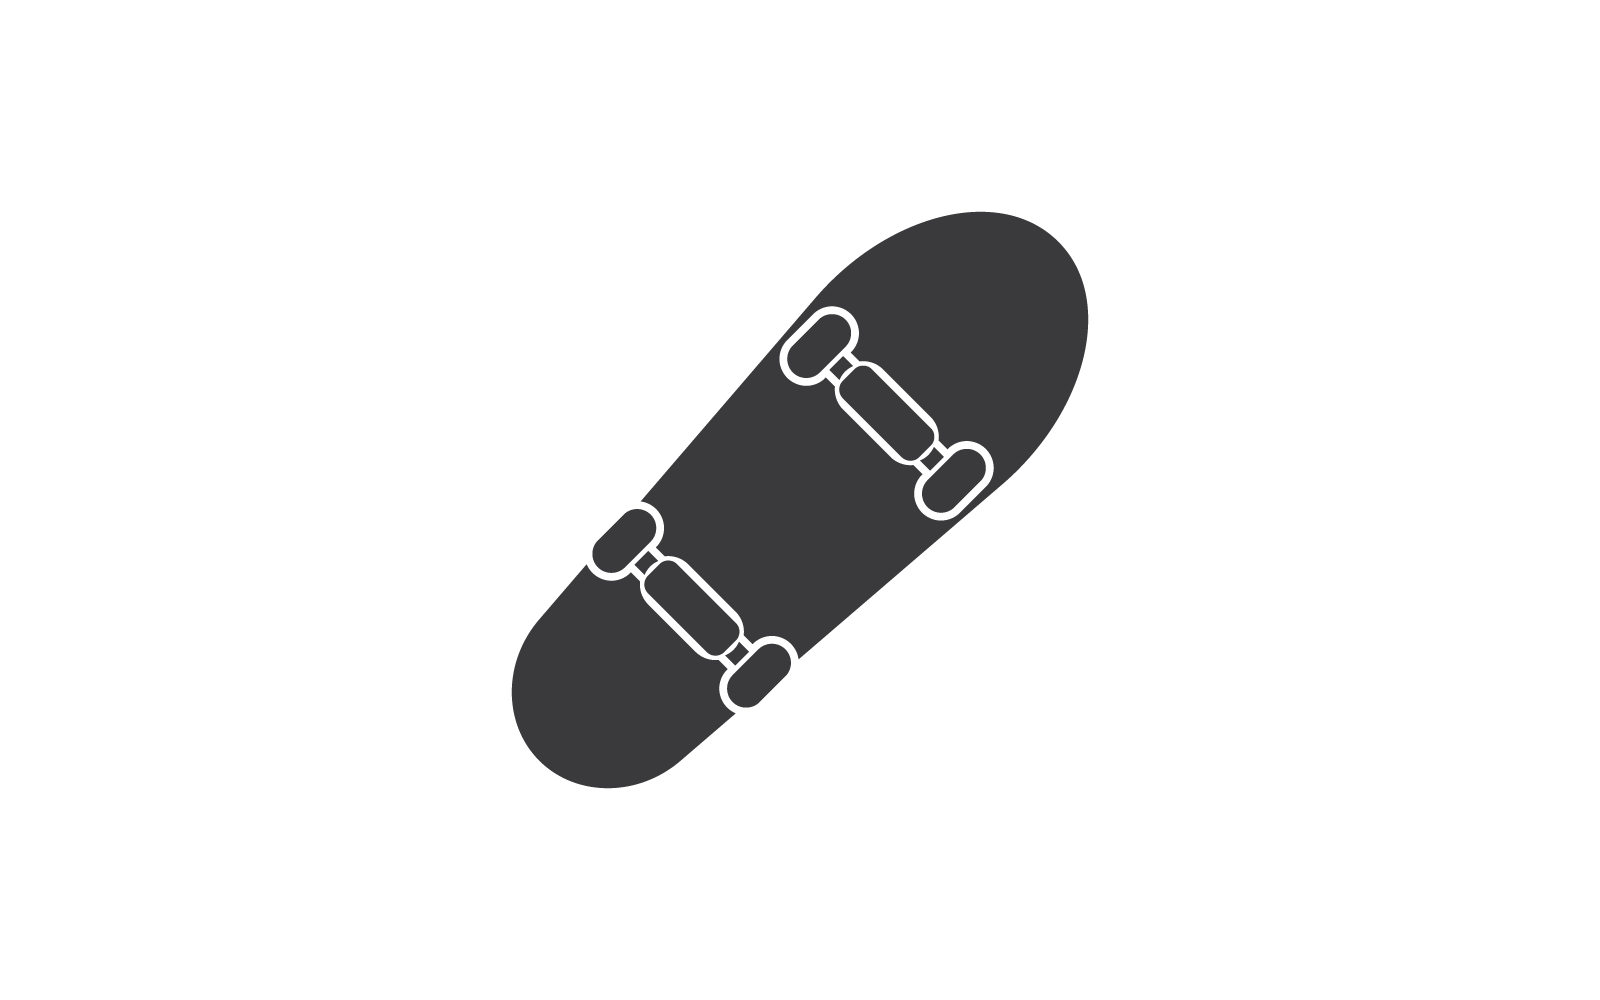 Skateboard icon vector flat design isolated on white background